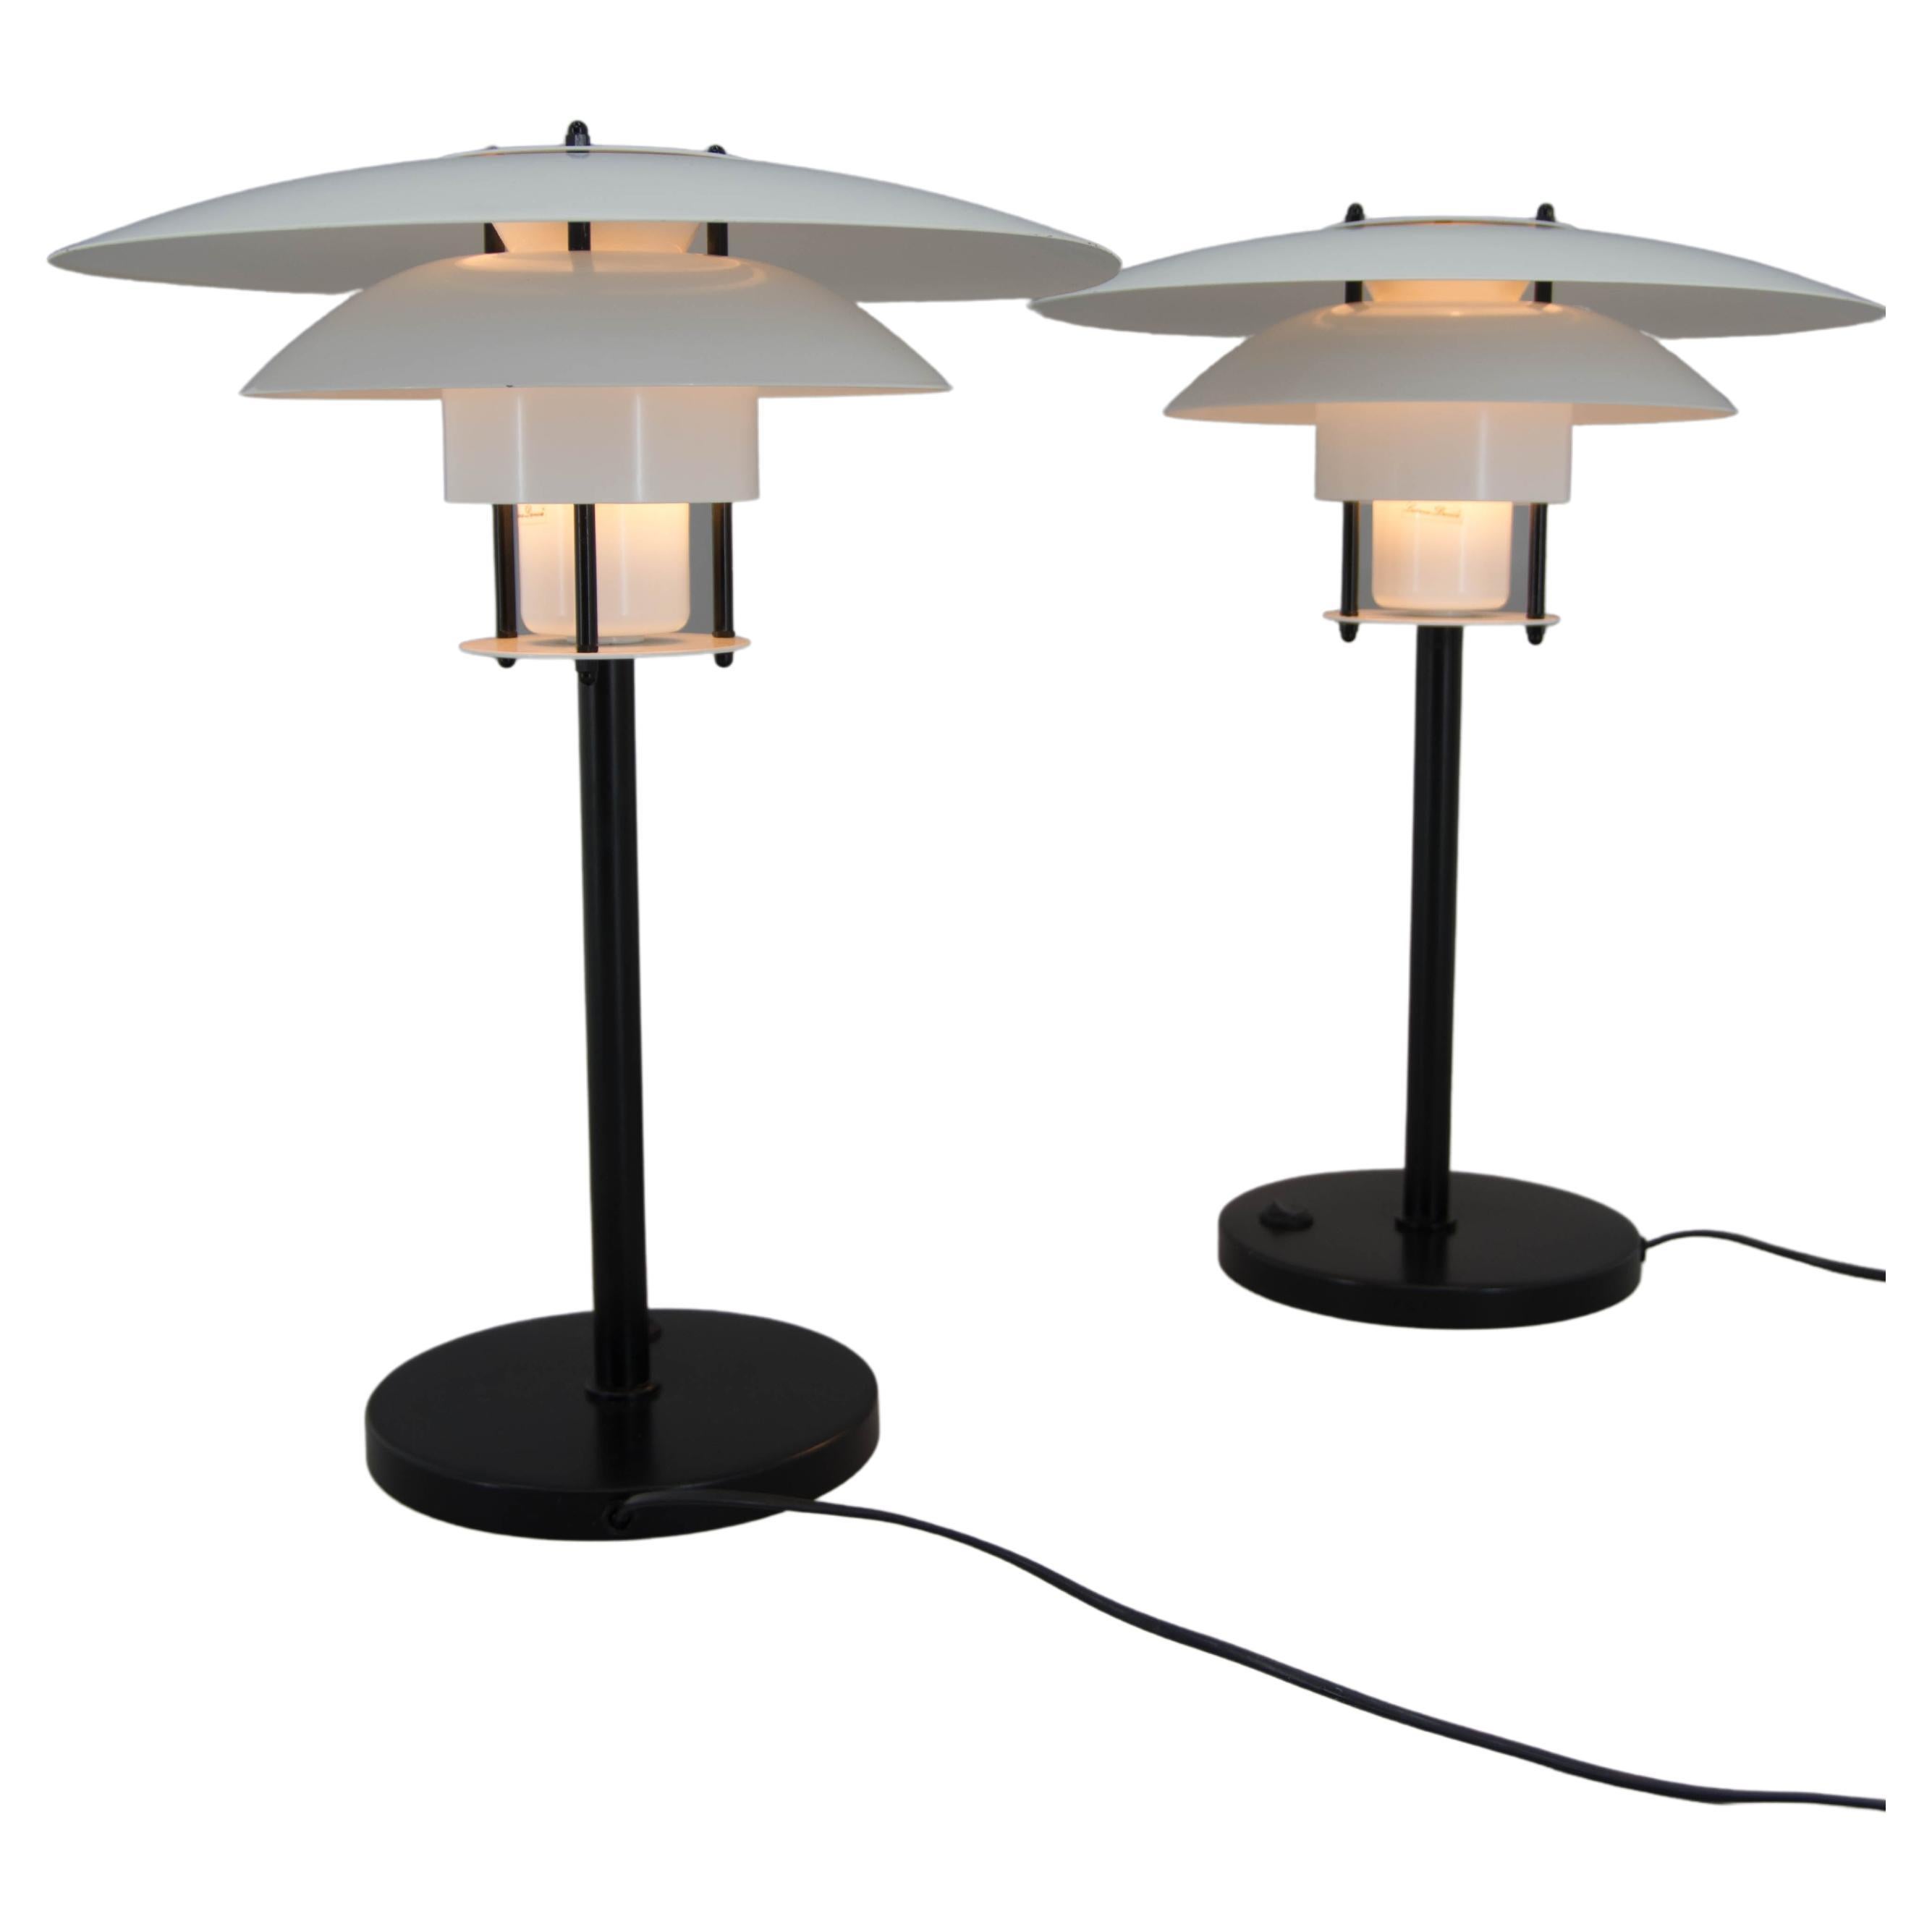 Set of Two Table Lamps by Jorgen Buchwald for Laterna Danica, 1970s